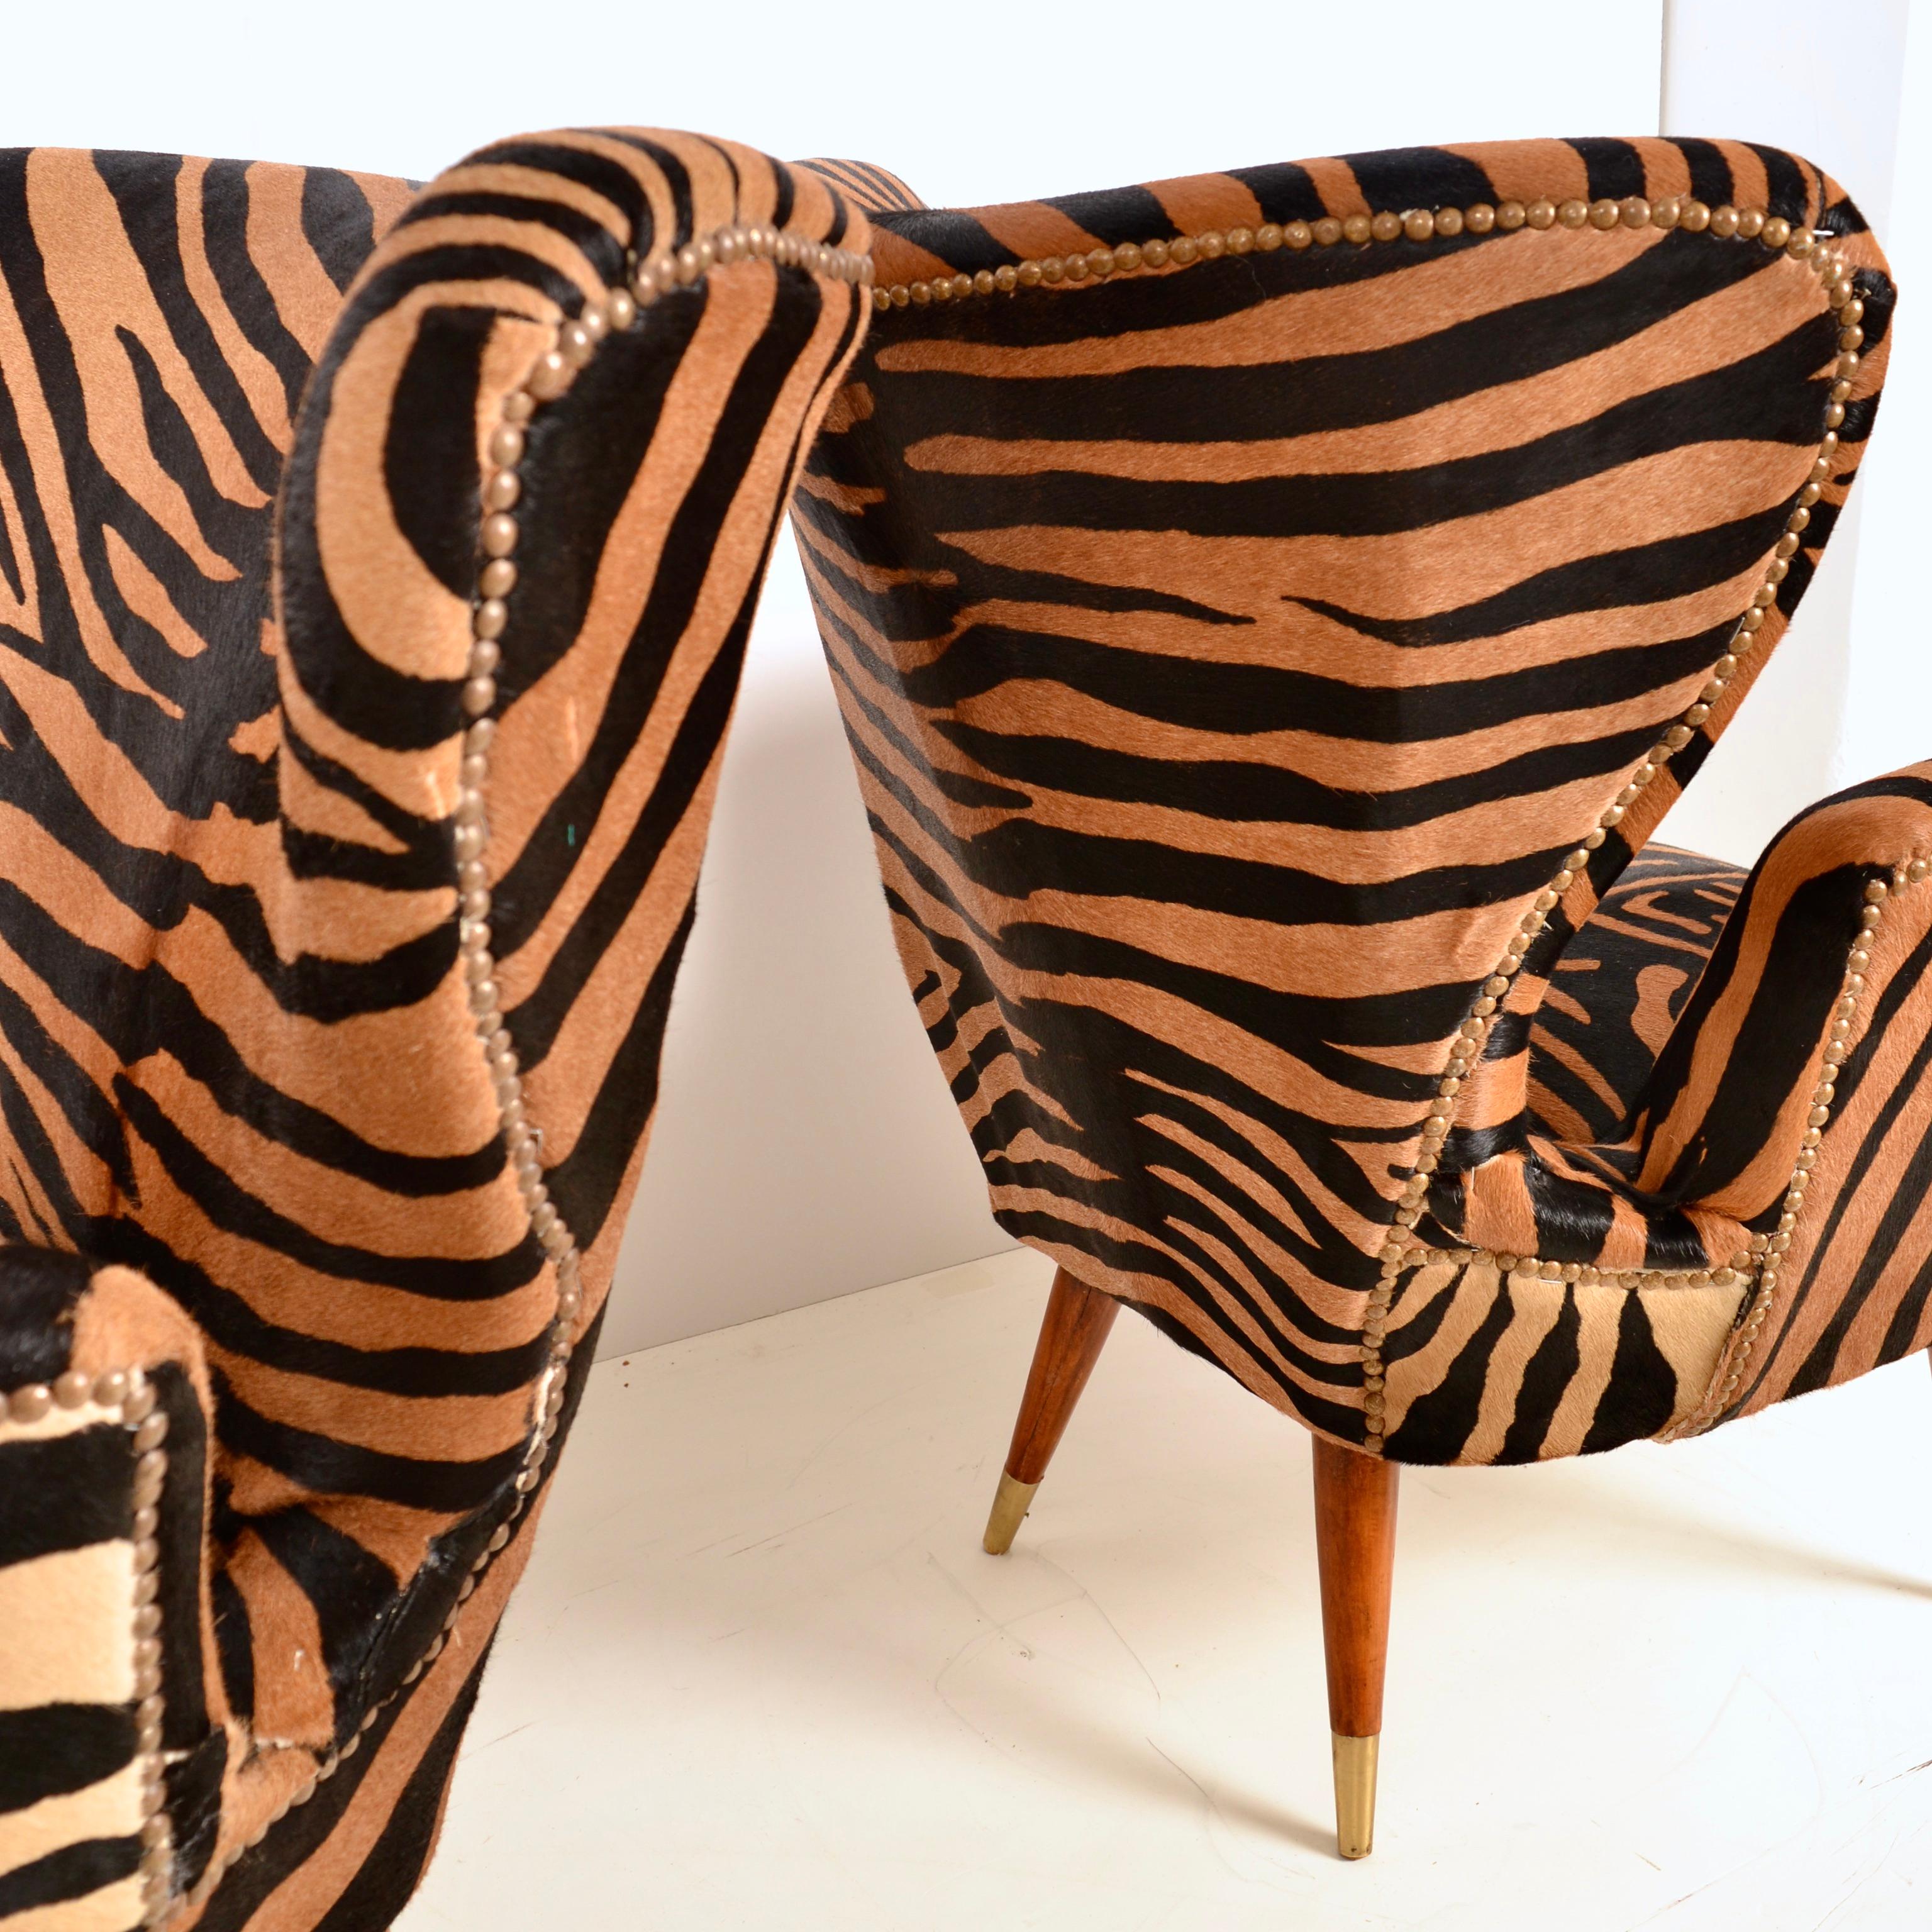 This sculptural pair of winged arm chairs were created by the influential Italian designer, Paolo Buffa. Newly upholstered in zebra patterned, dyed cow skin with nail head details, the chairs feature tapered wood legs with brass caps. Iconic design